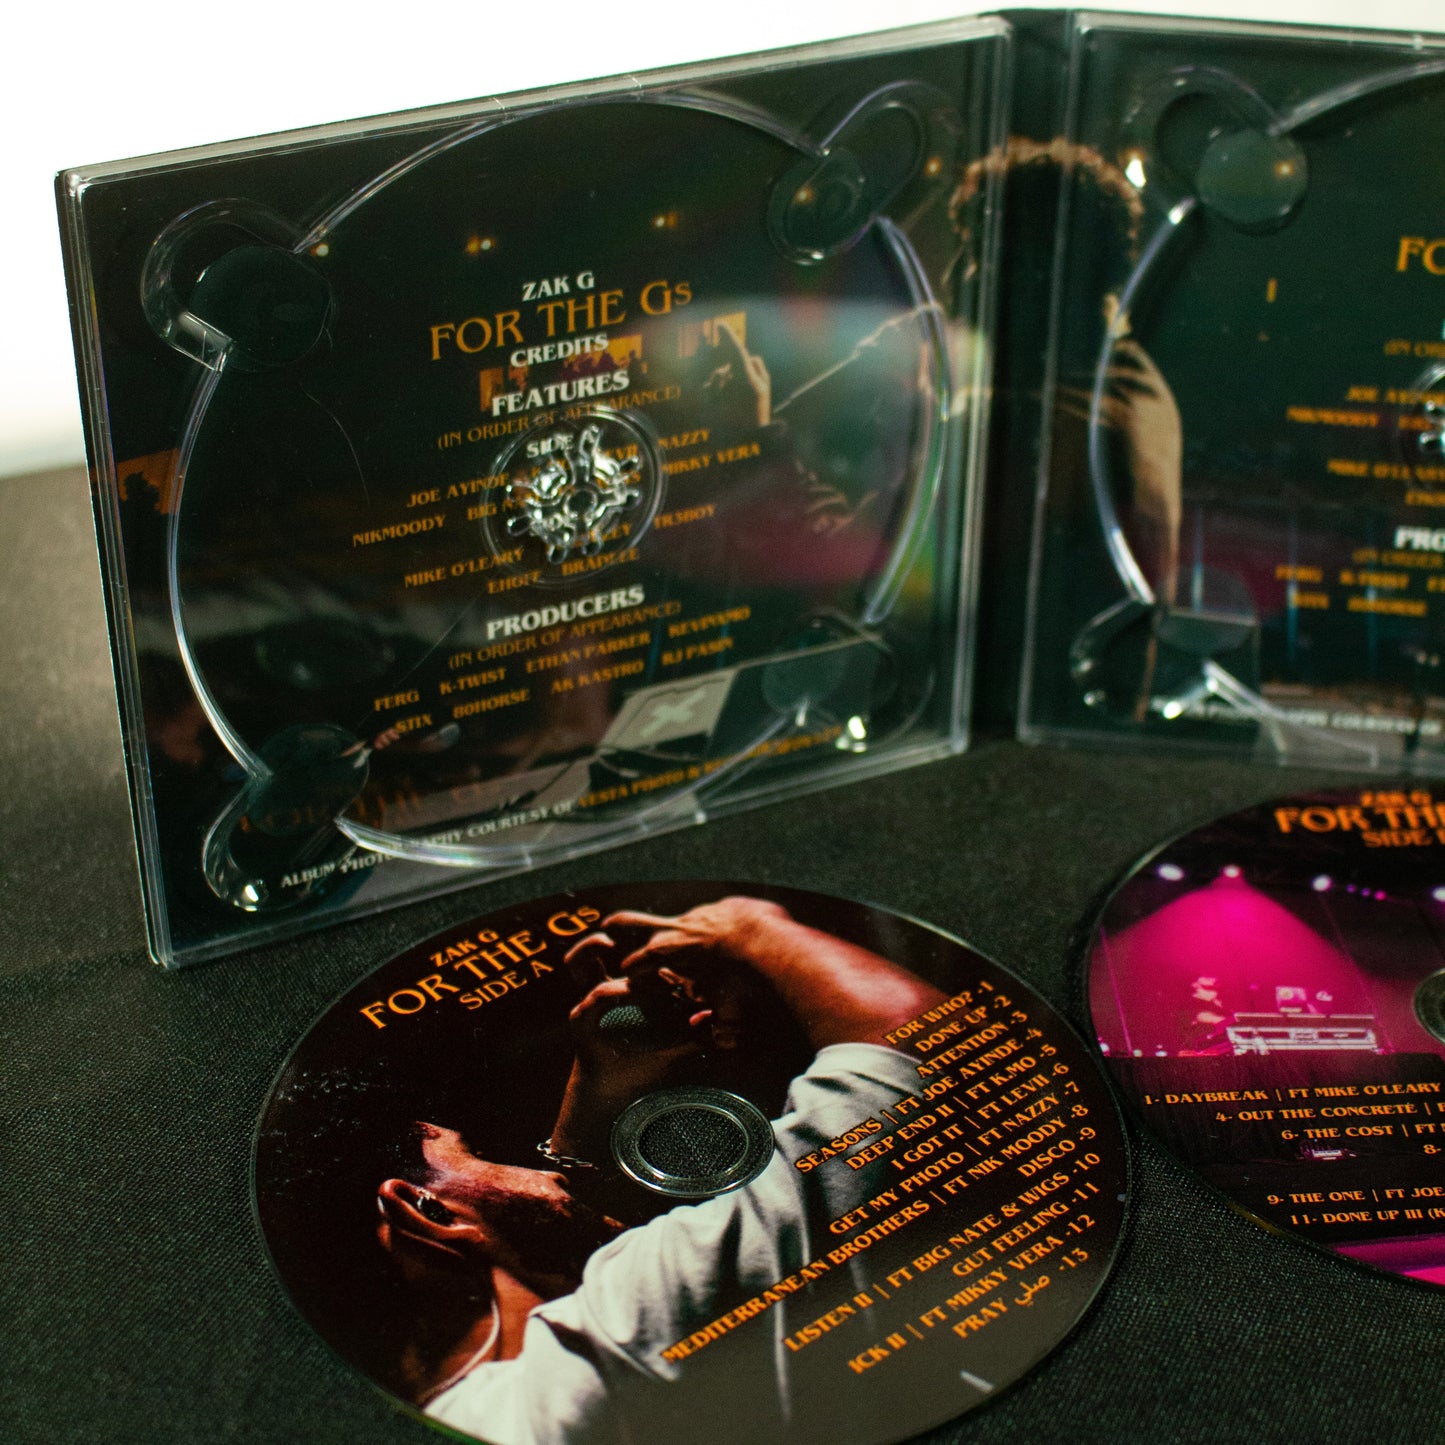 For The Gs Complete Edition (Signed Double Disc CD, digital download + bonus content)